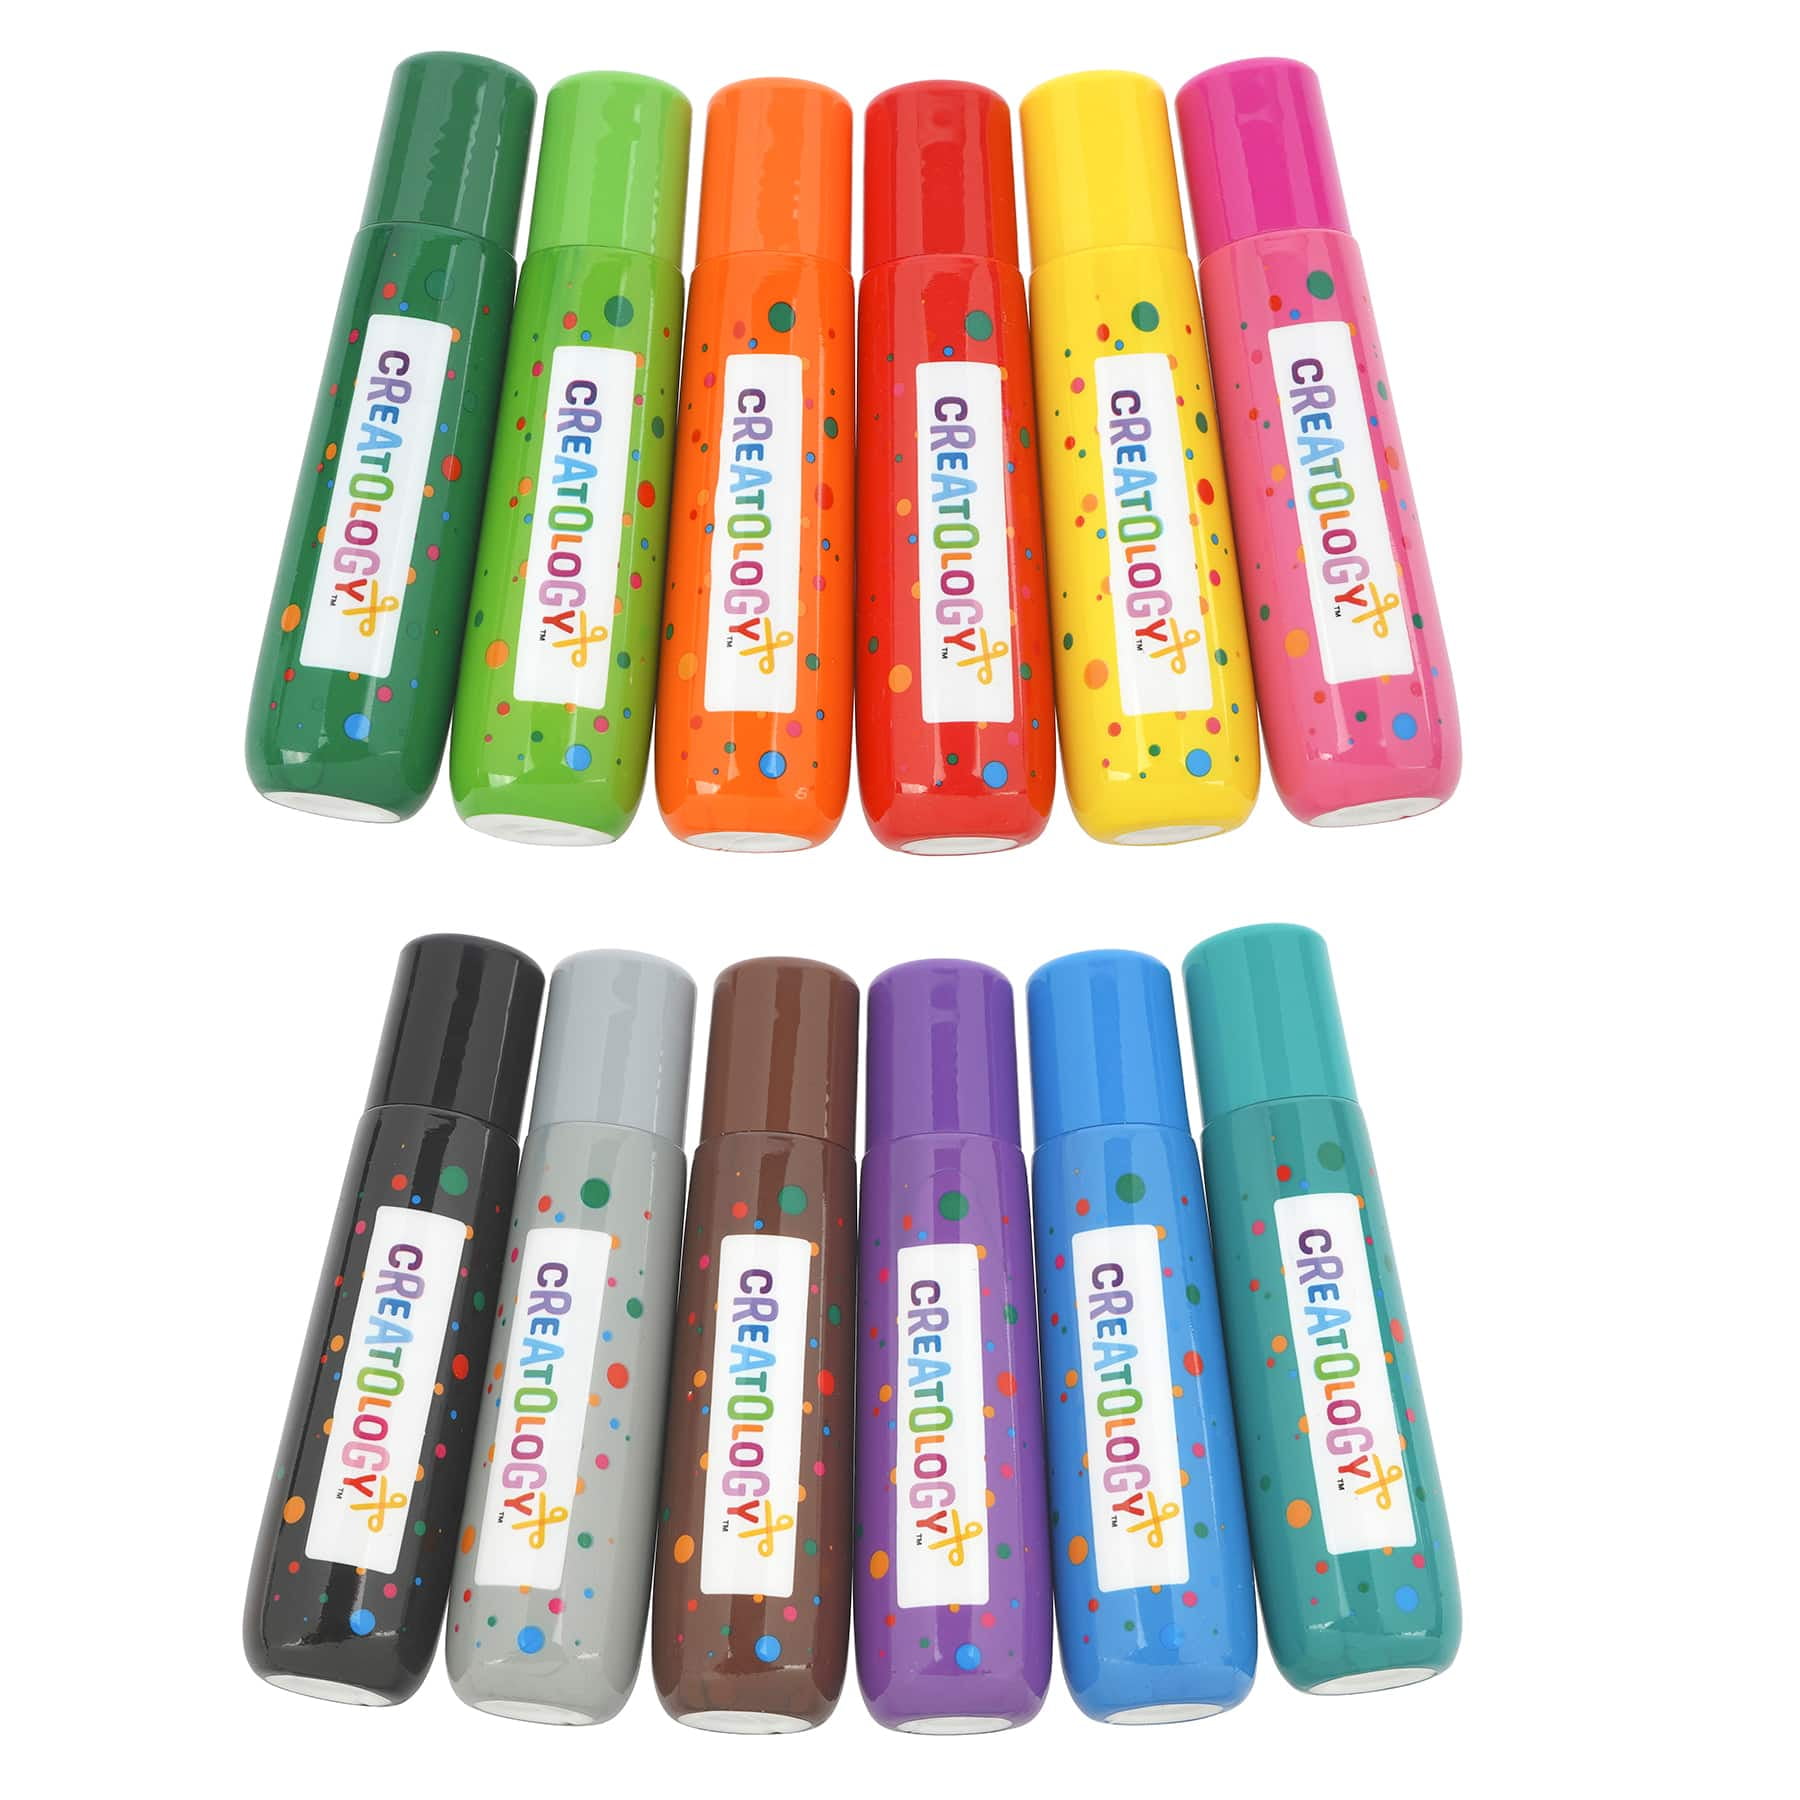 12 Count (96 total) Rainbow Washable Dot Markers by Creatology - Perfect  for Drawing, Coloring, Arts & Crafts - Bulk 8 Pack